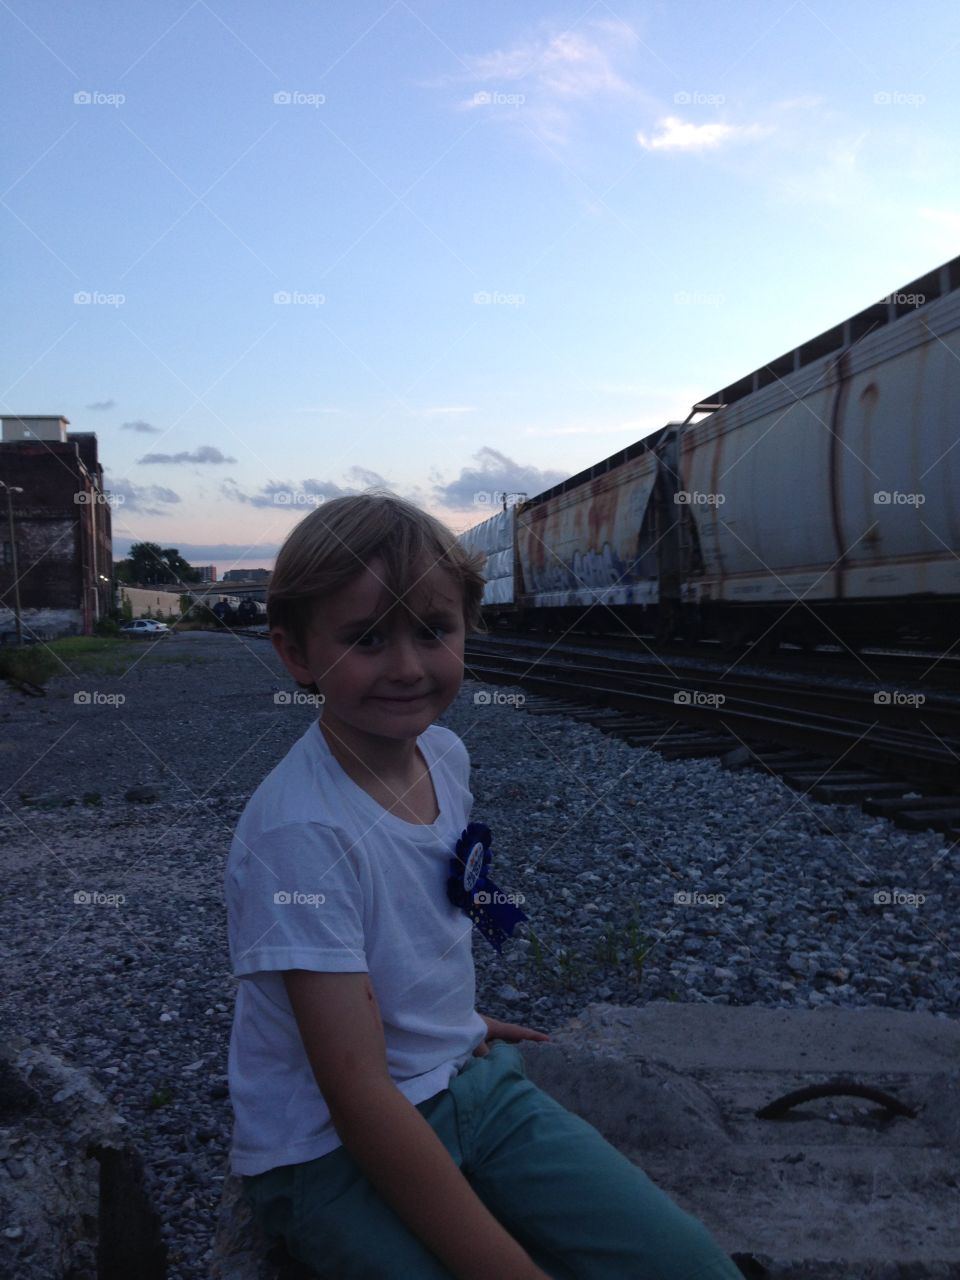 Watching the trains 